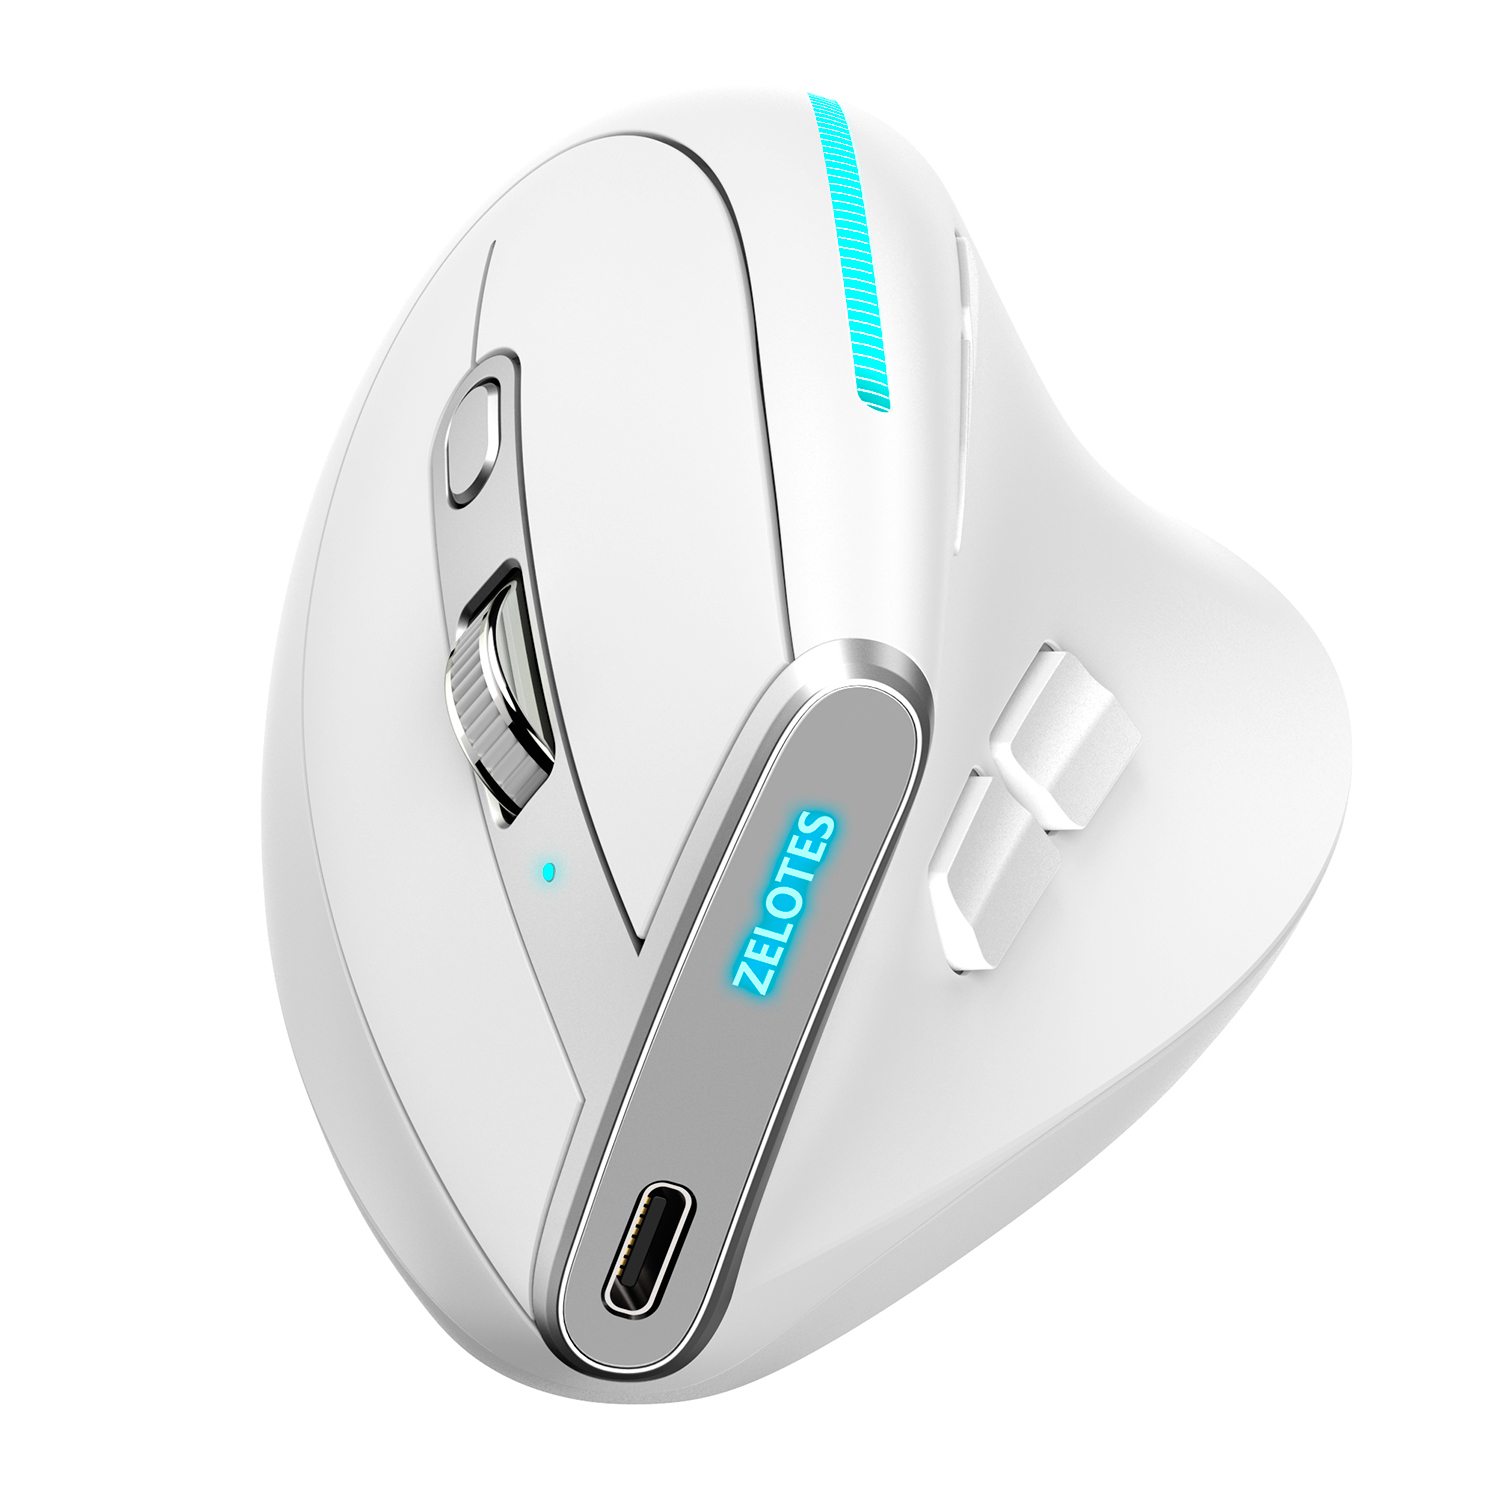 ZELOTES F-36 Wireless vertical 2&period;4G Bluetooth mouse full color light 8 key programming five DPI game mouse built-in 730mah lithium battery White